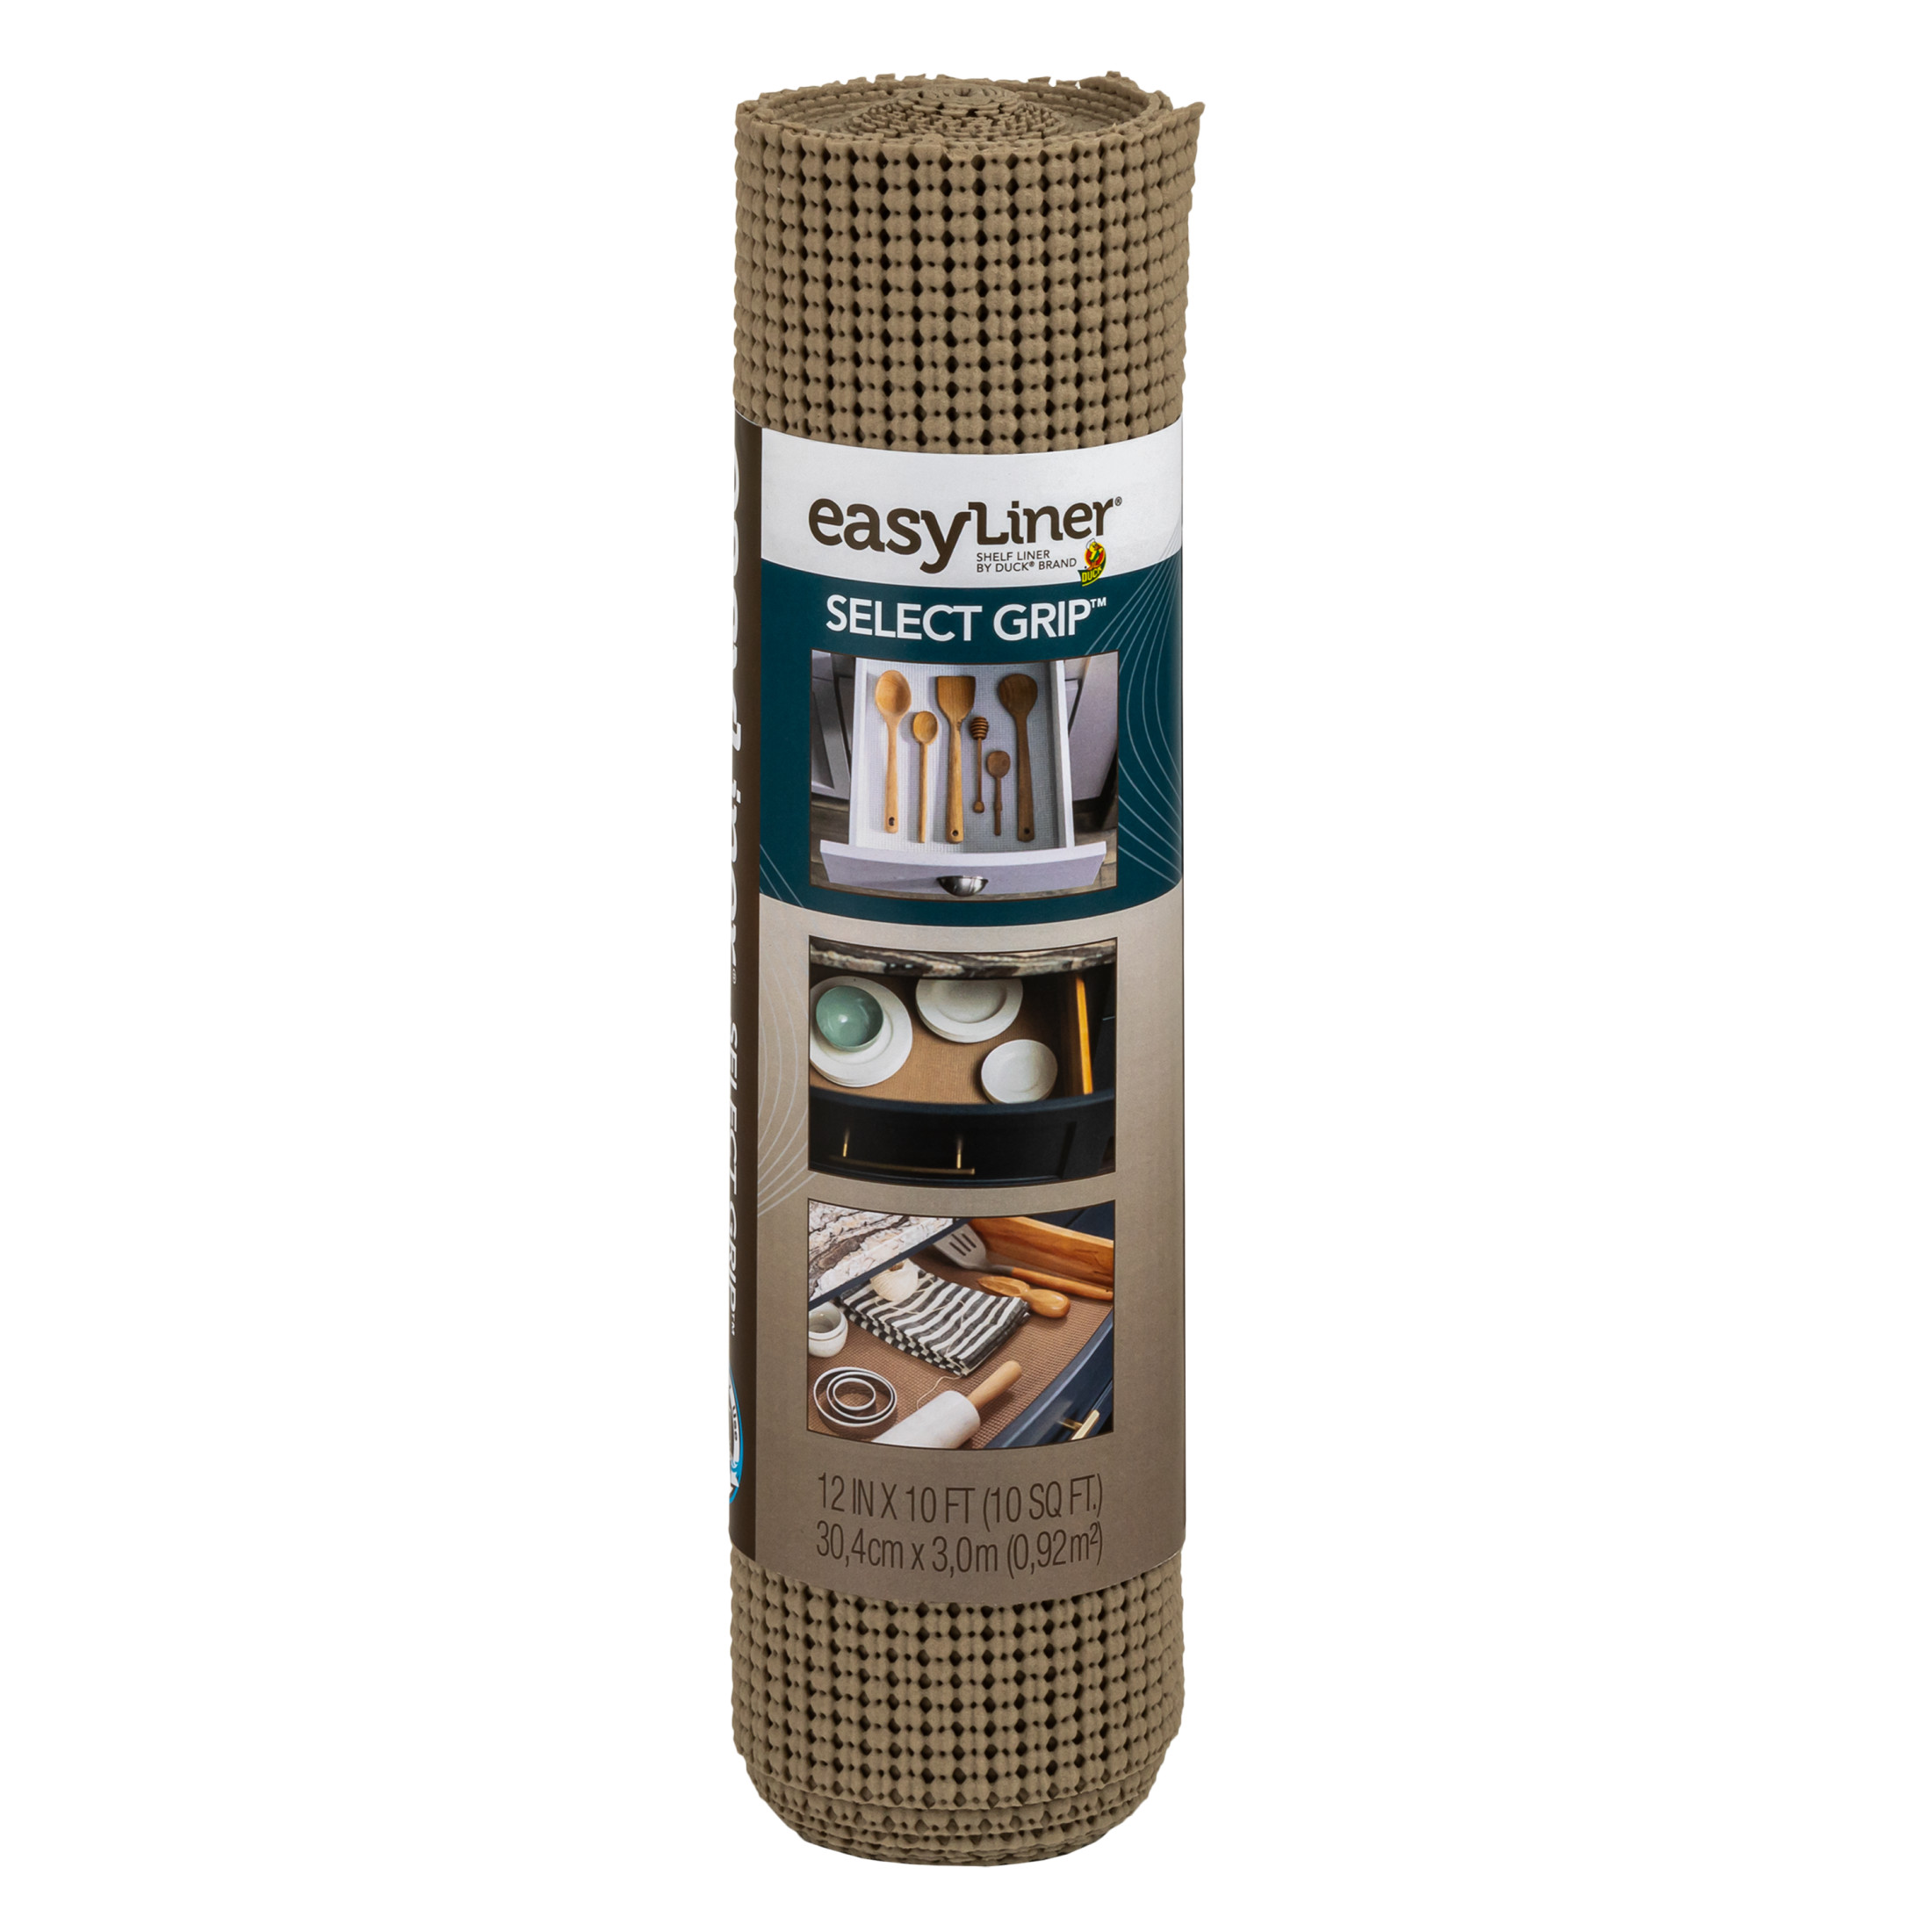 EasyLiner Select Grip Shelf Liner, Taupe, 12 in. x 10 ft. Roll - image 4 of 11